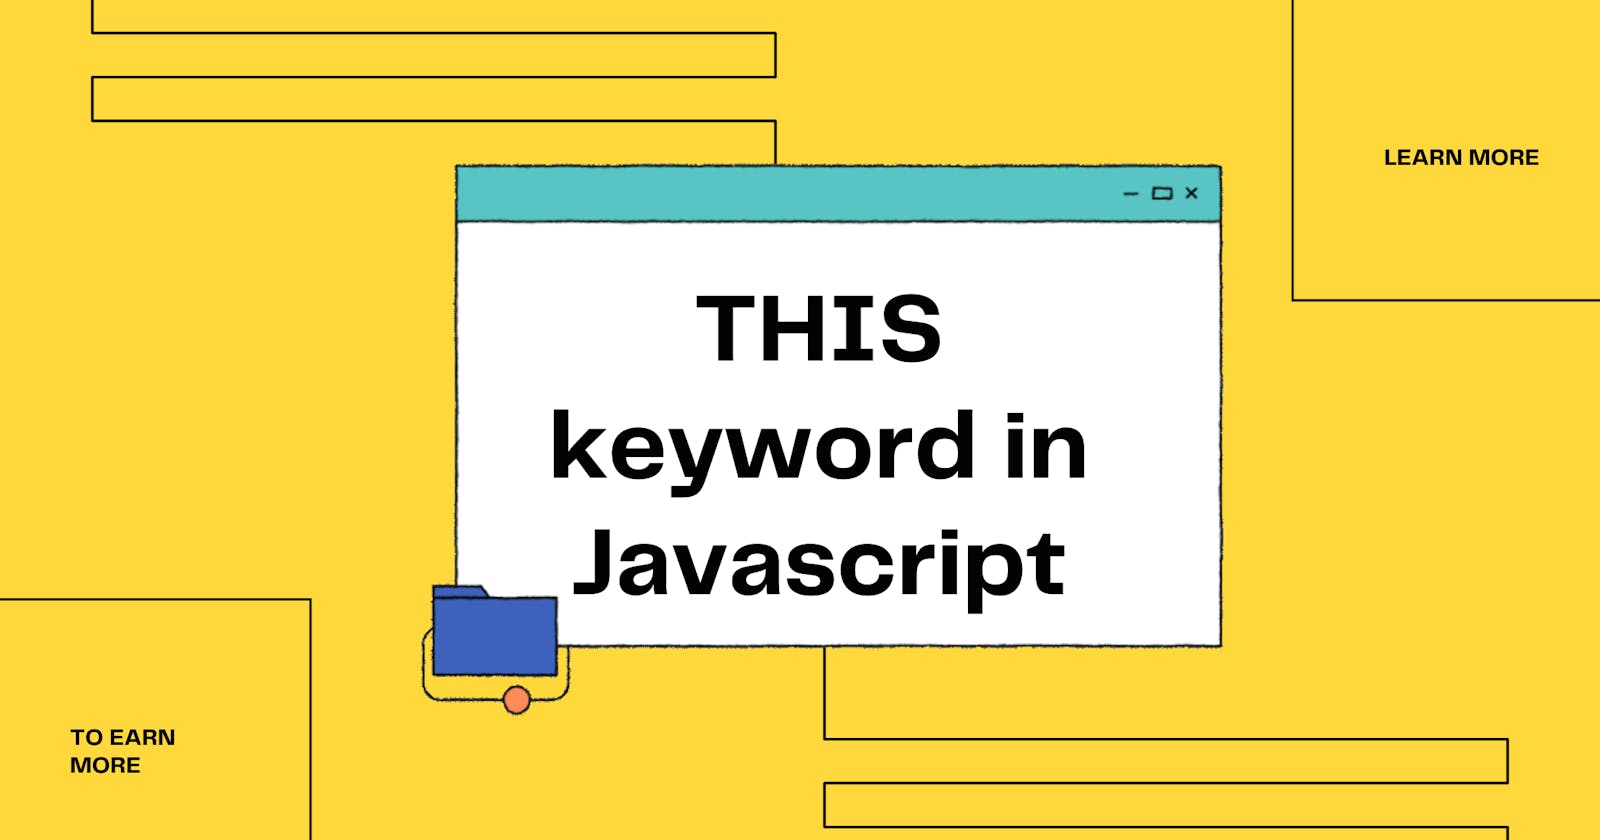 What is THIS keyword in javascript really?